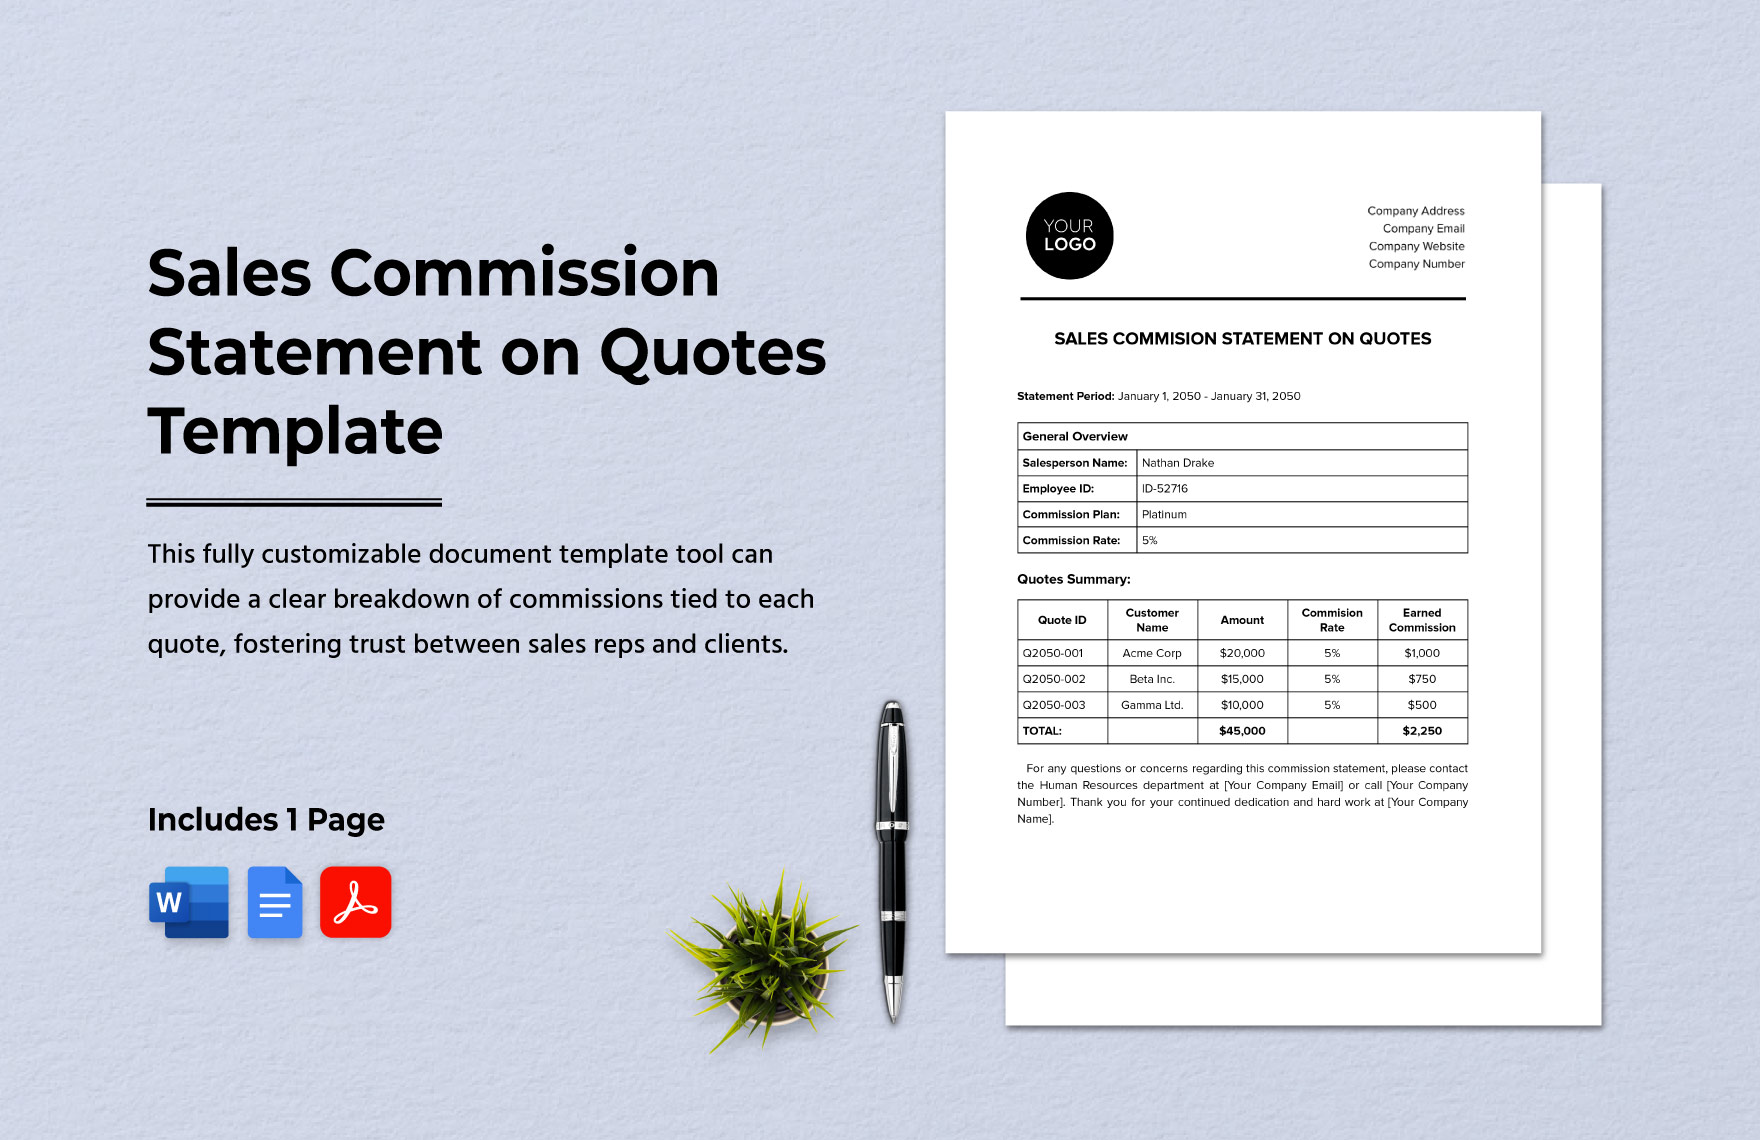 Sales Commission Statement on Quotes Template in Word, Google Docs, PDF